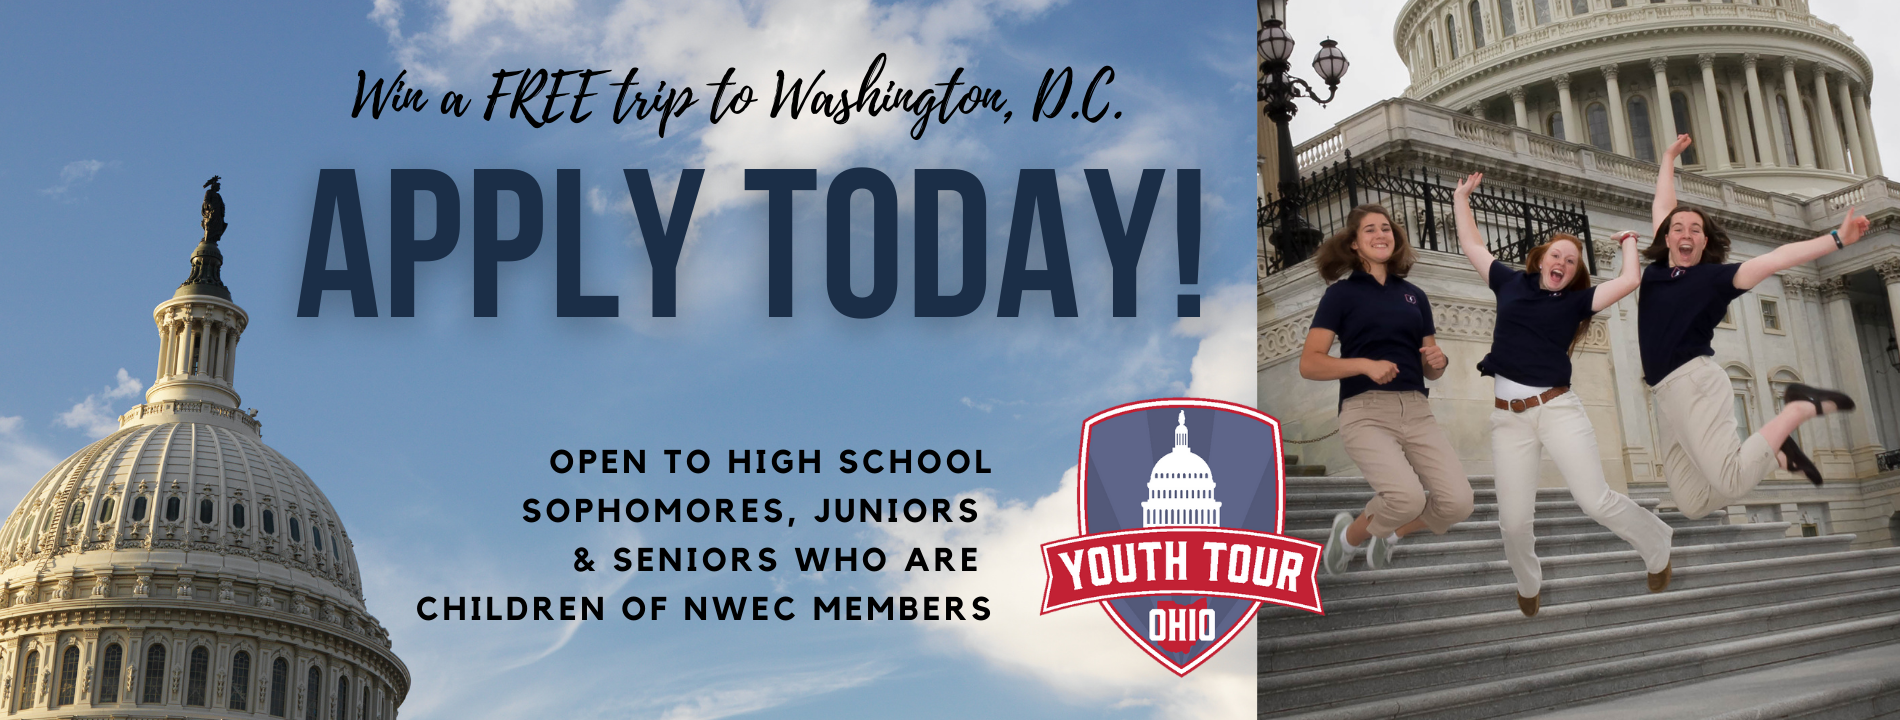 Apply now for Youth Tour to Washington, DC, on a free trip with your co-op